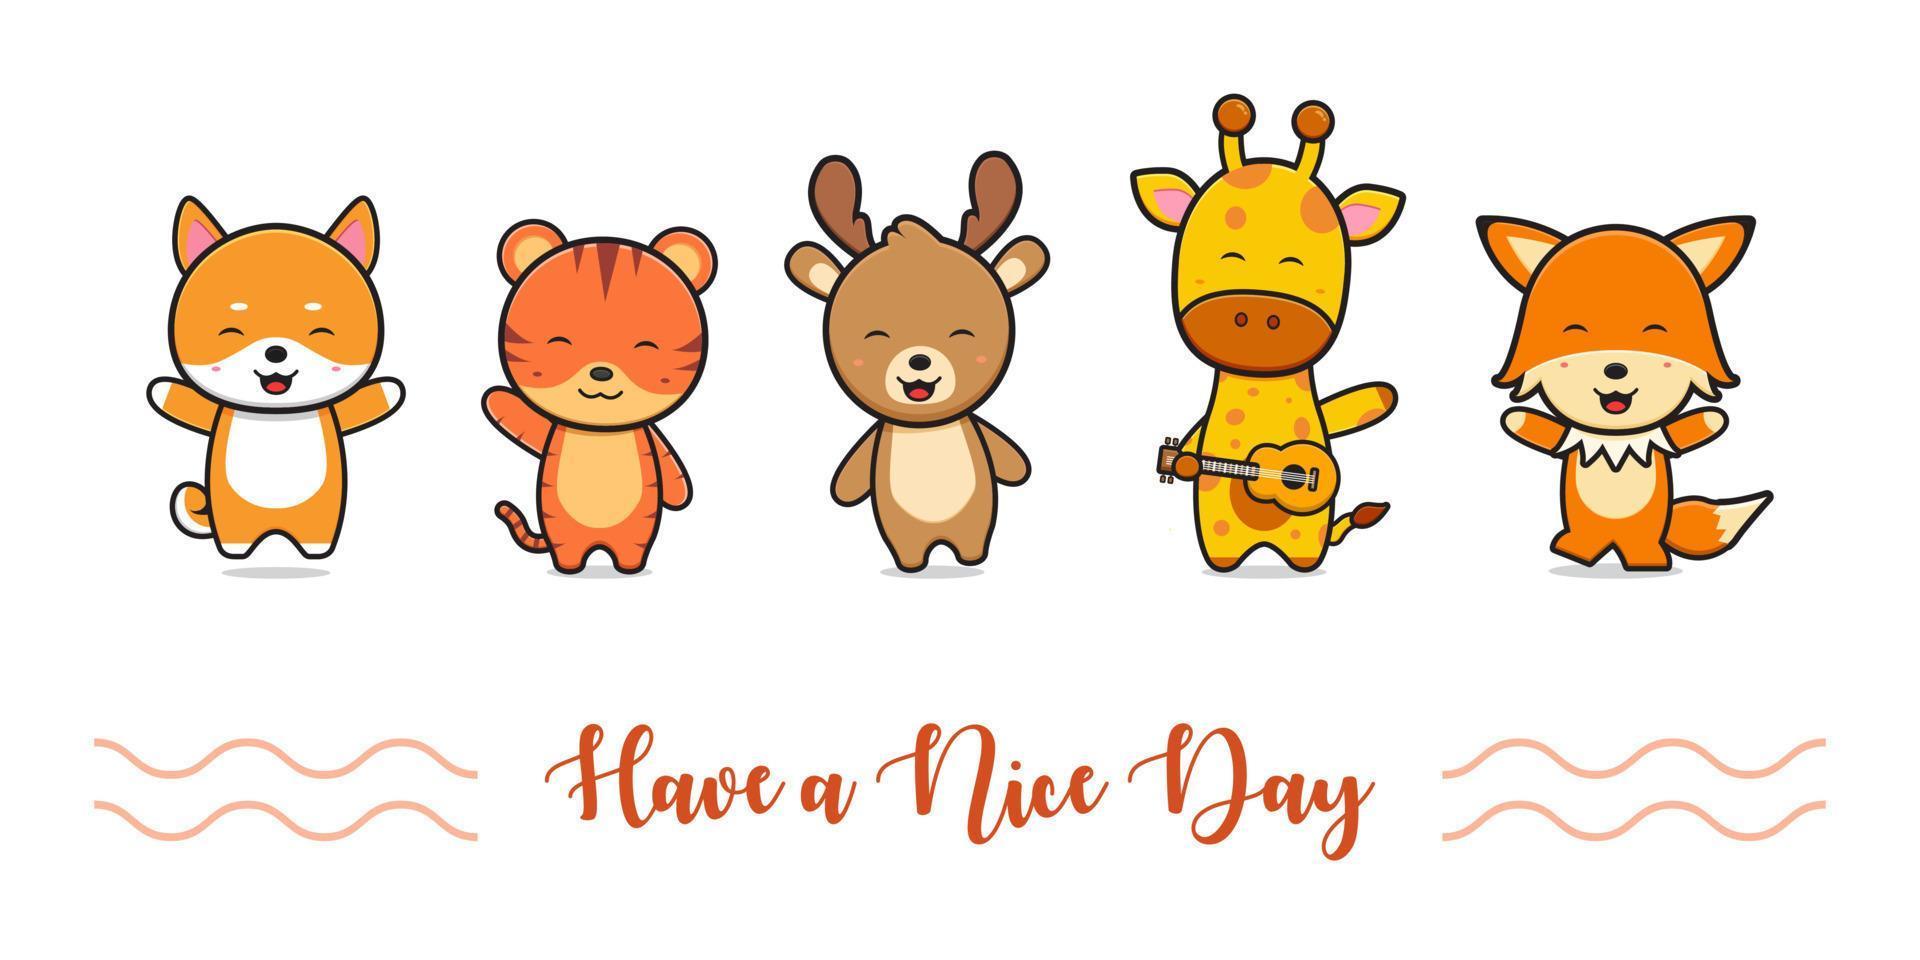 Cute animal greeting card doodle banner background wallpaper icon cartoon illustration vector